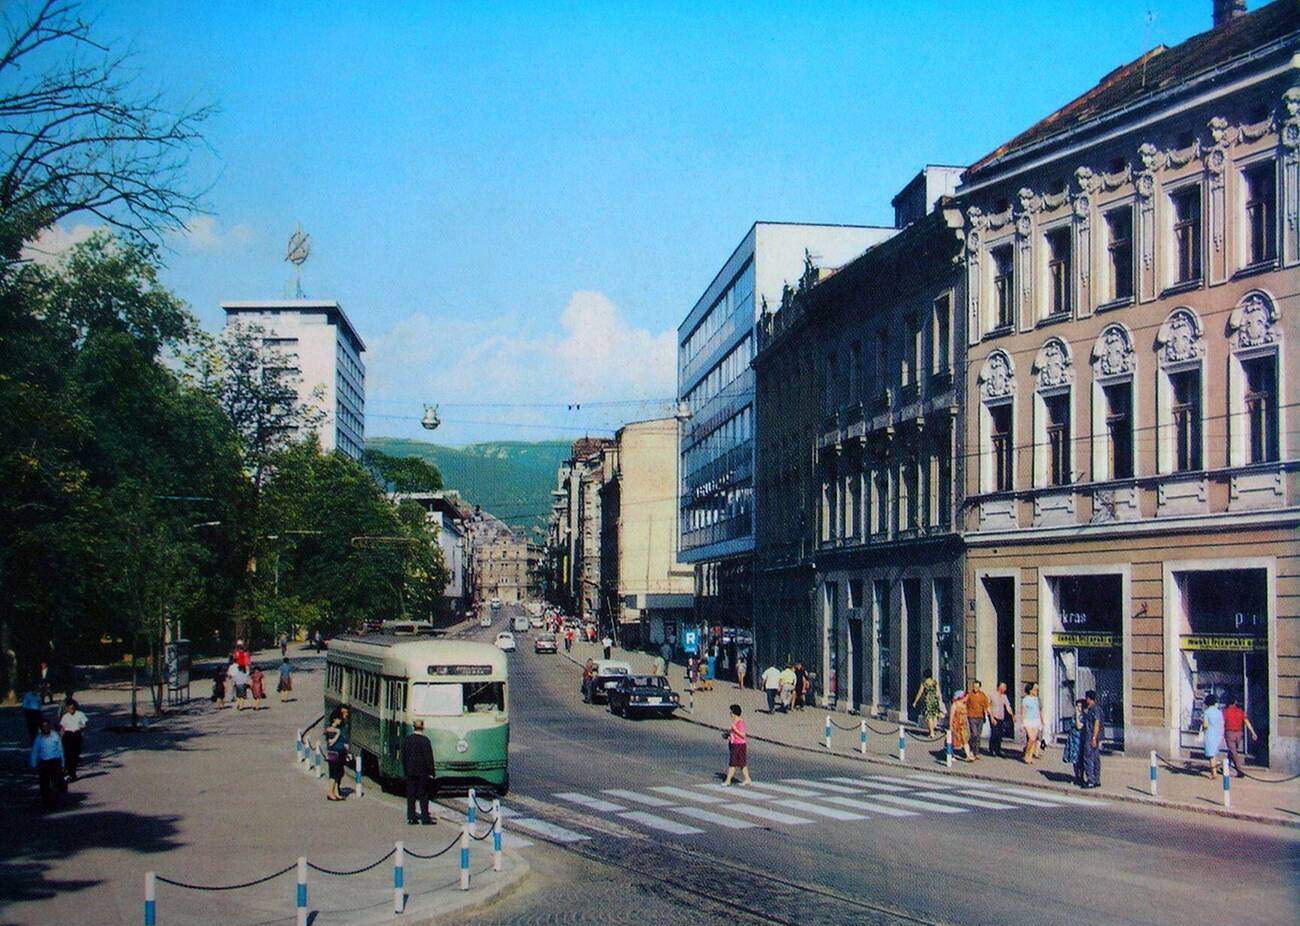 A westbound PCC tram bought from D.C. Transit in Washington, D.C. running on Line 3 in Sarajevo, Yugoslavia, in the 1960s